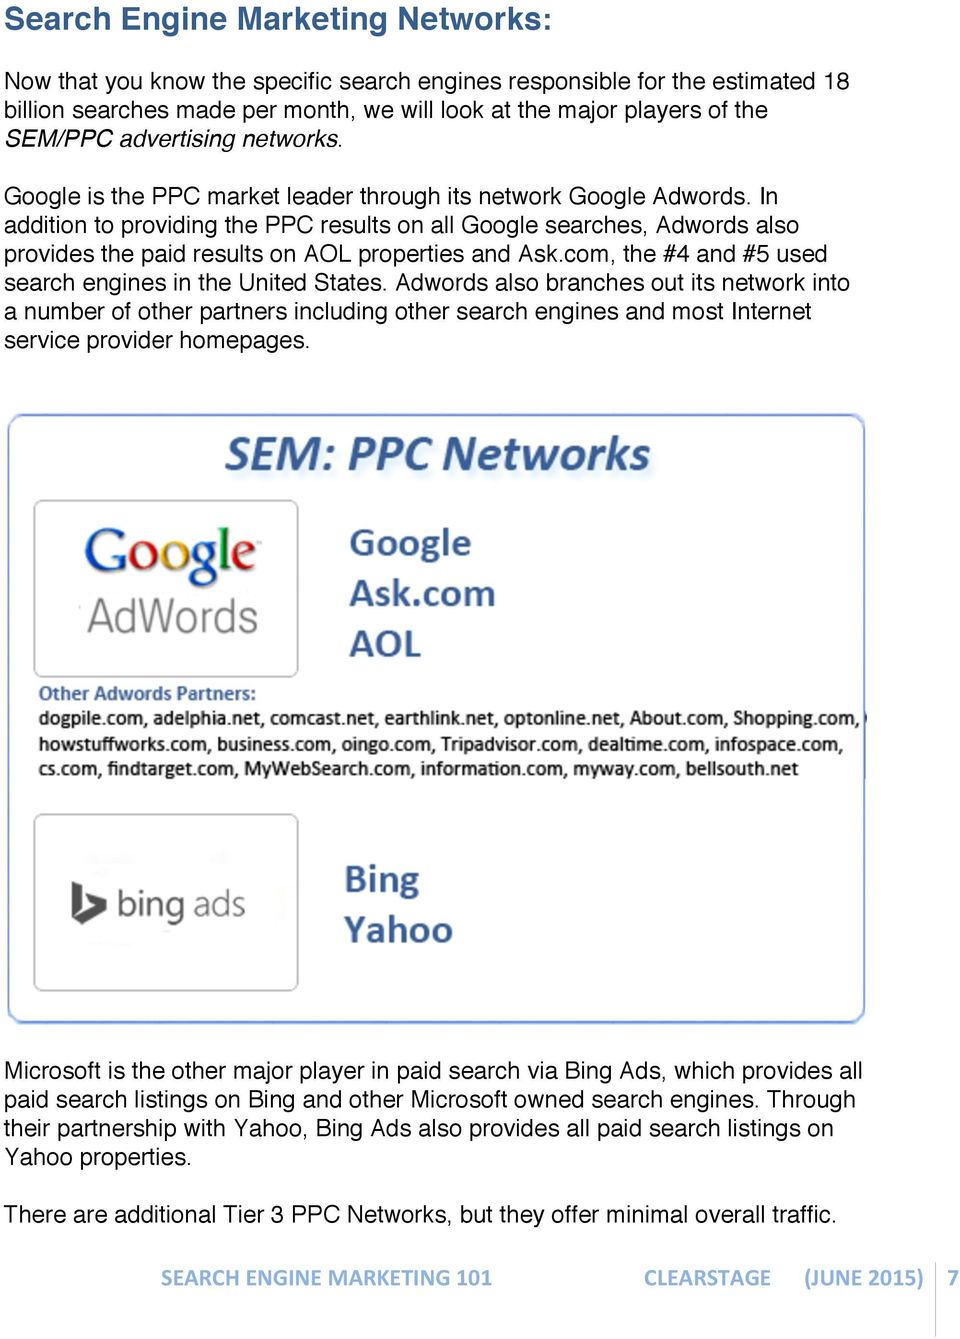 In addition to providing the PPC results on all Google searches, Adwords also provides the paid results on AOL properties and Ask.com, the #4 and #5 used search engines in the United States.